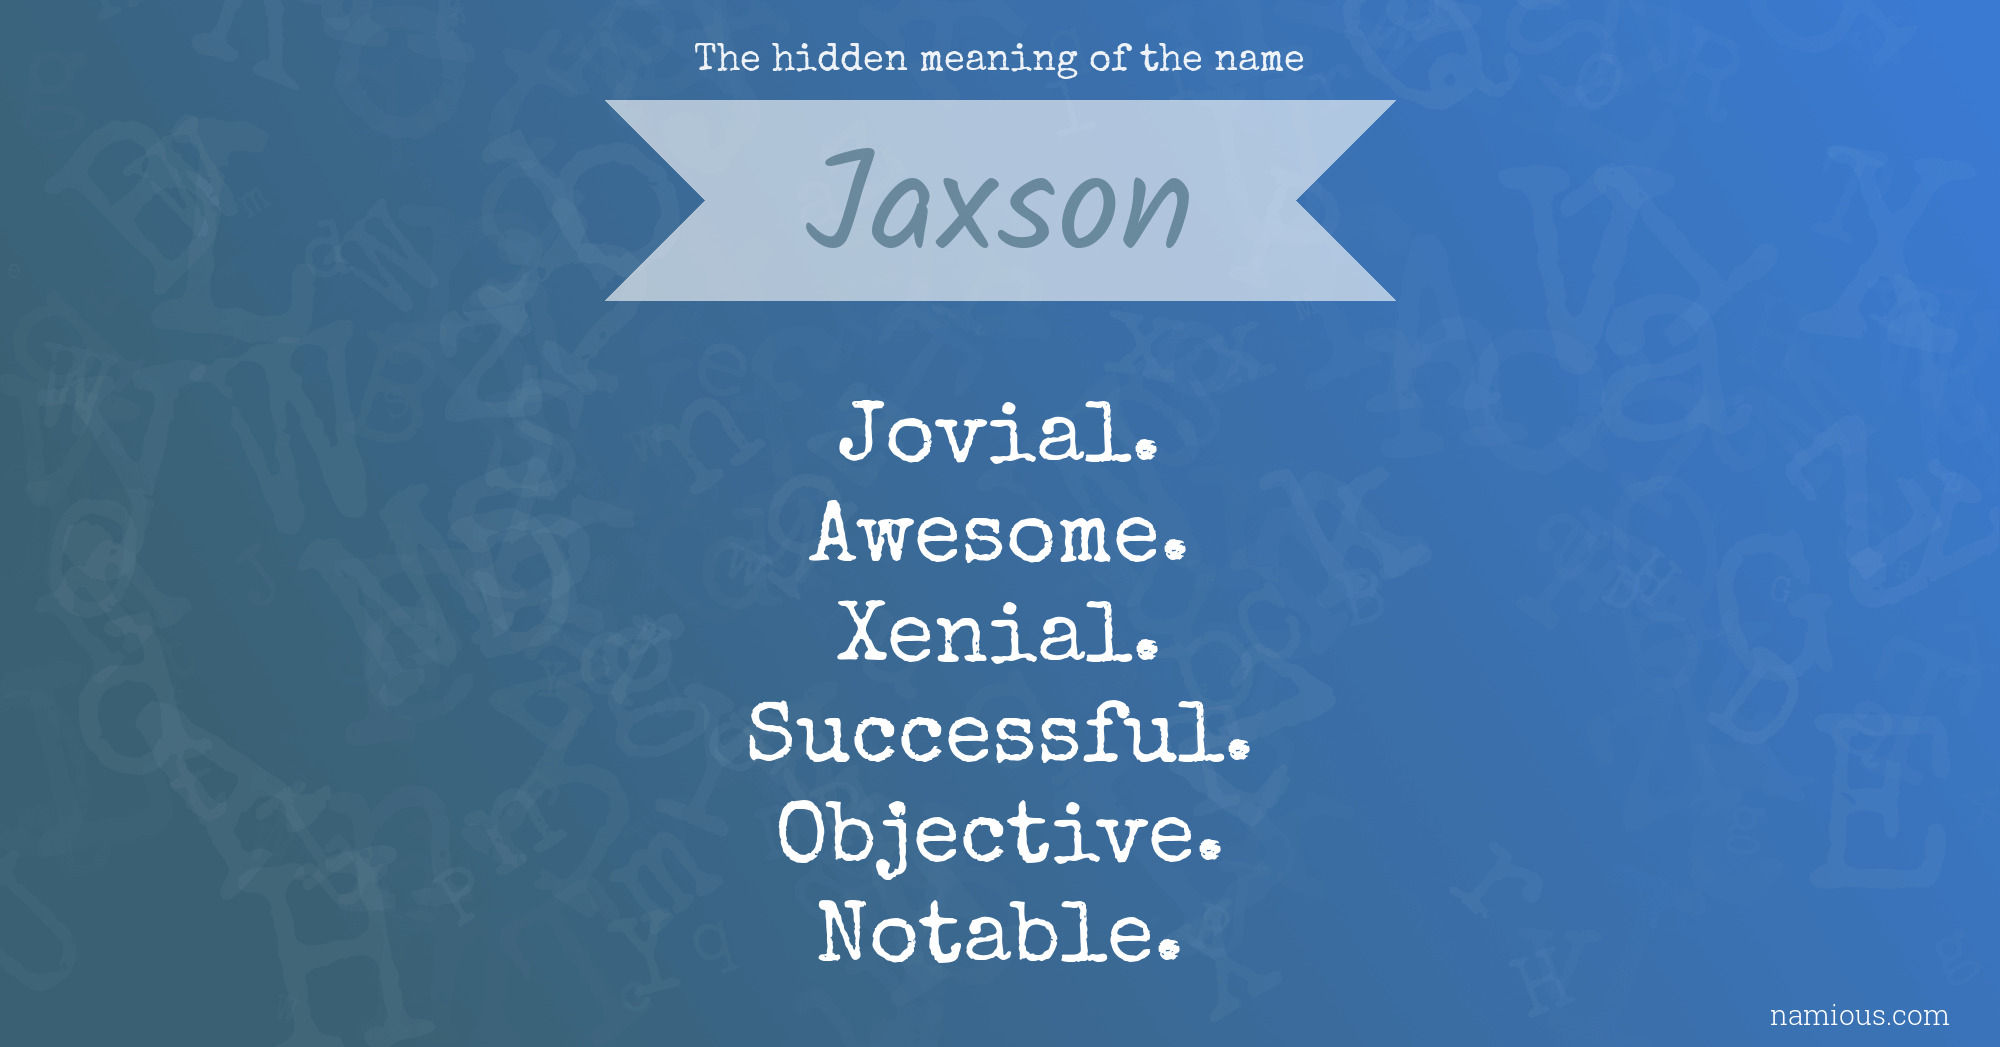 The hidden meaning of the name Jaxson